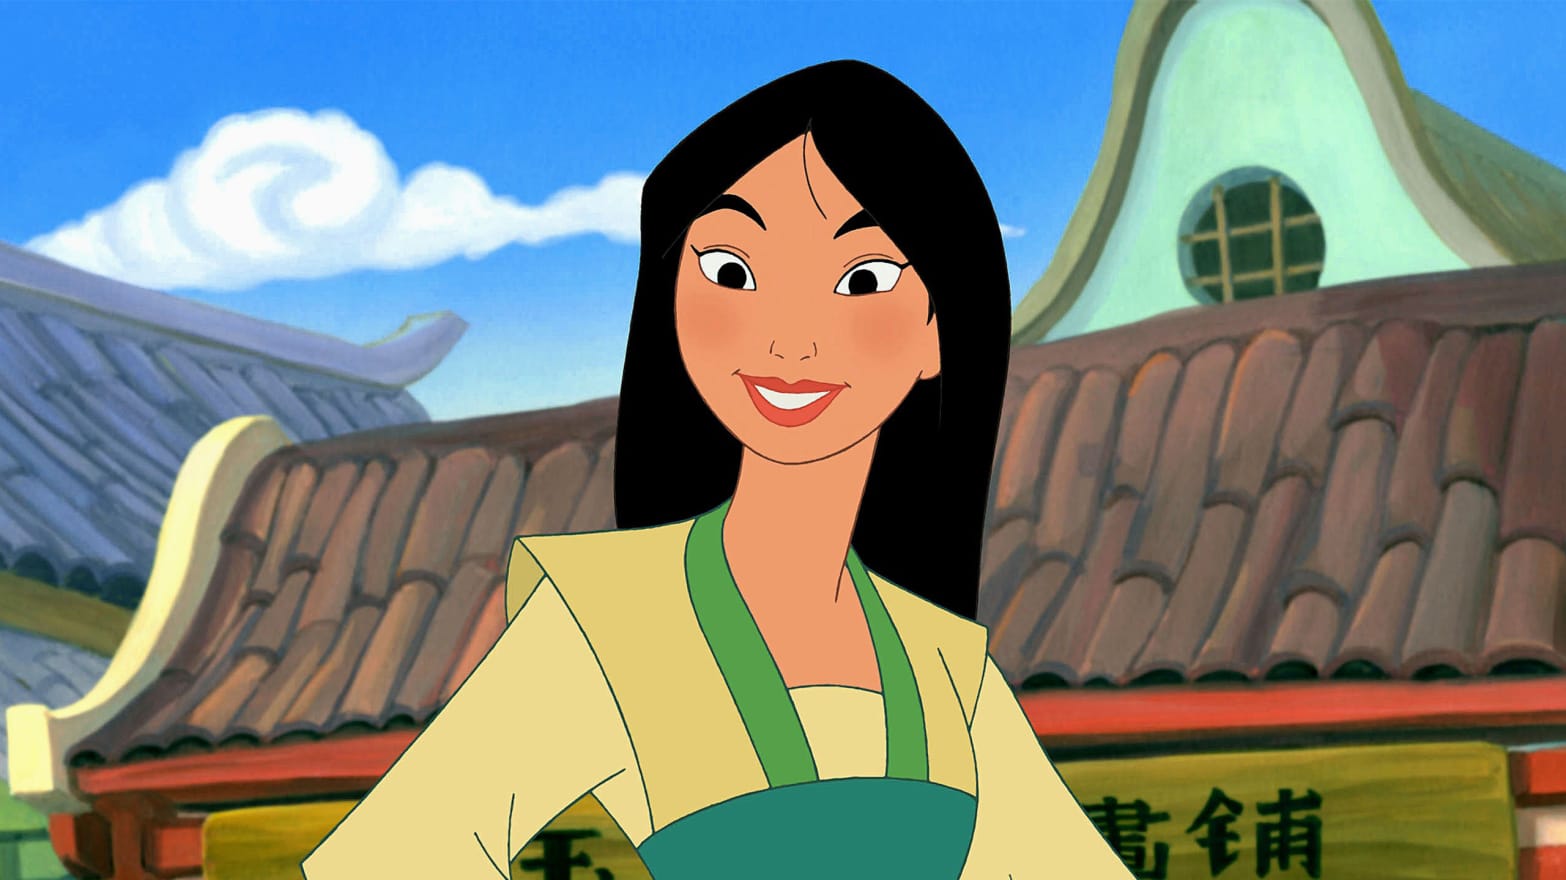 Most Disney Fans Can’t Identify More Than 15/18 of These Movie Foods – Can You? Mulan